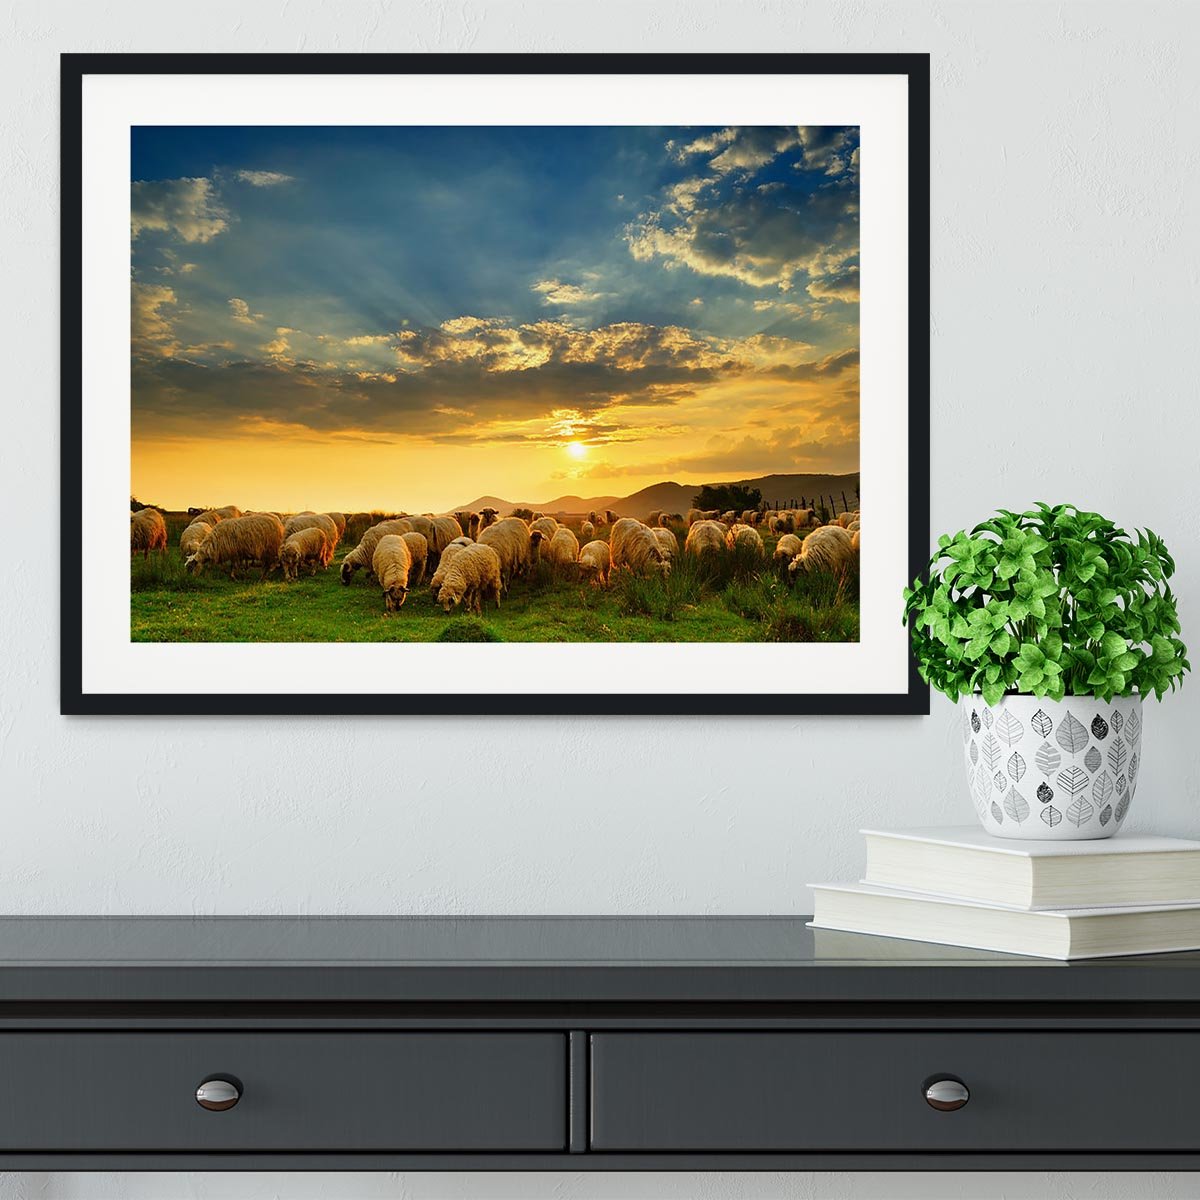 Flock of sheep grazing in a hill at sunset Framed Print - Canvas Art Rocks - 1